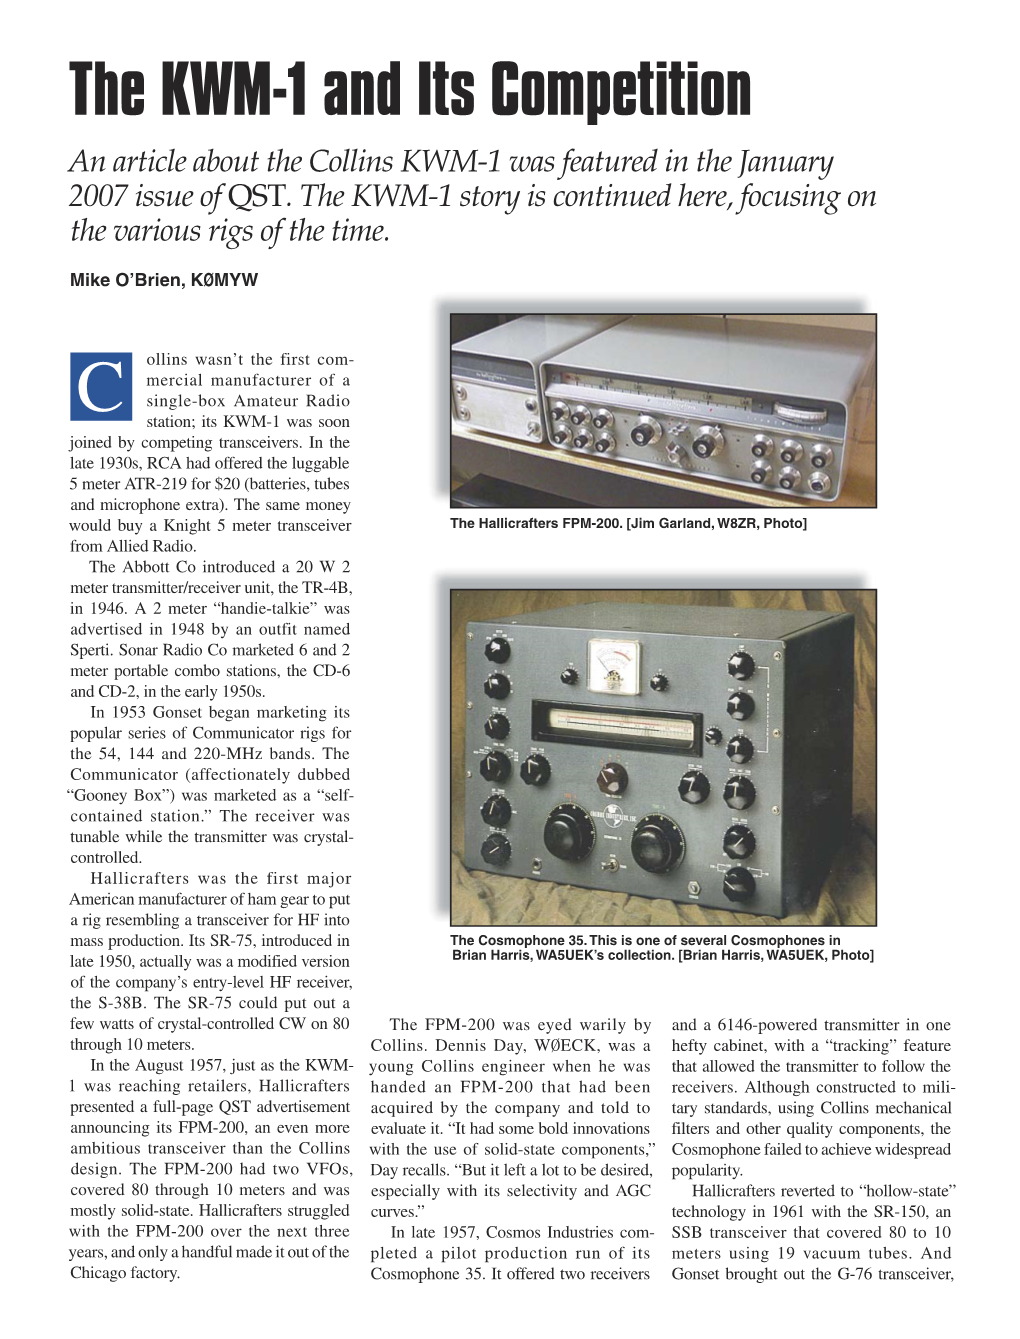 The KWM-1 and Its Competition an Article About the Collins KWM-1 Was Featured in the January 2007 Issue of QST